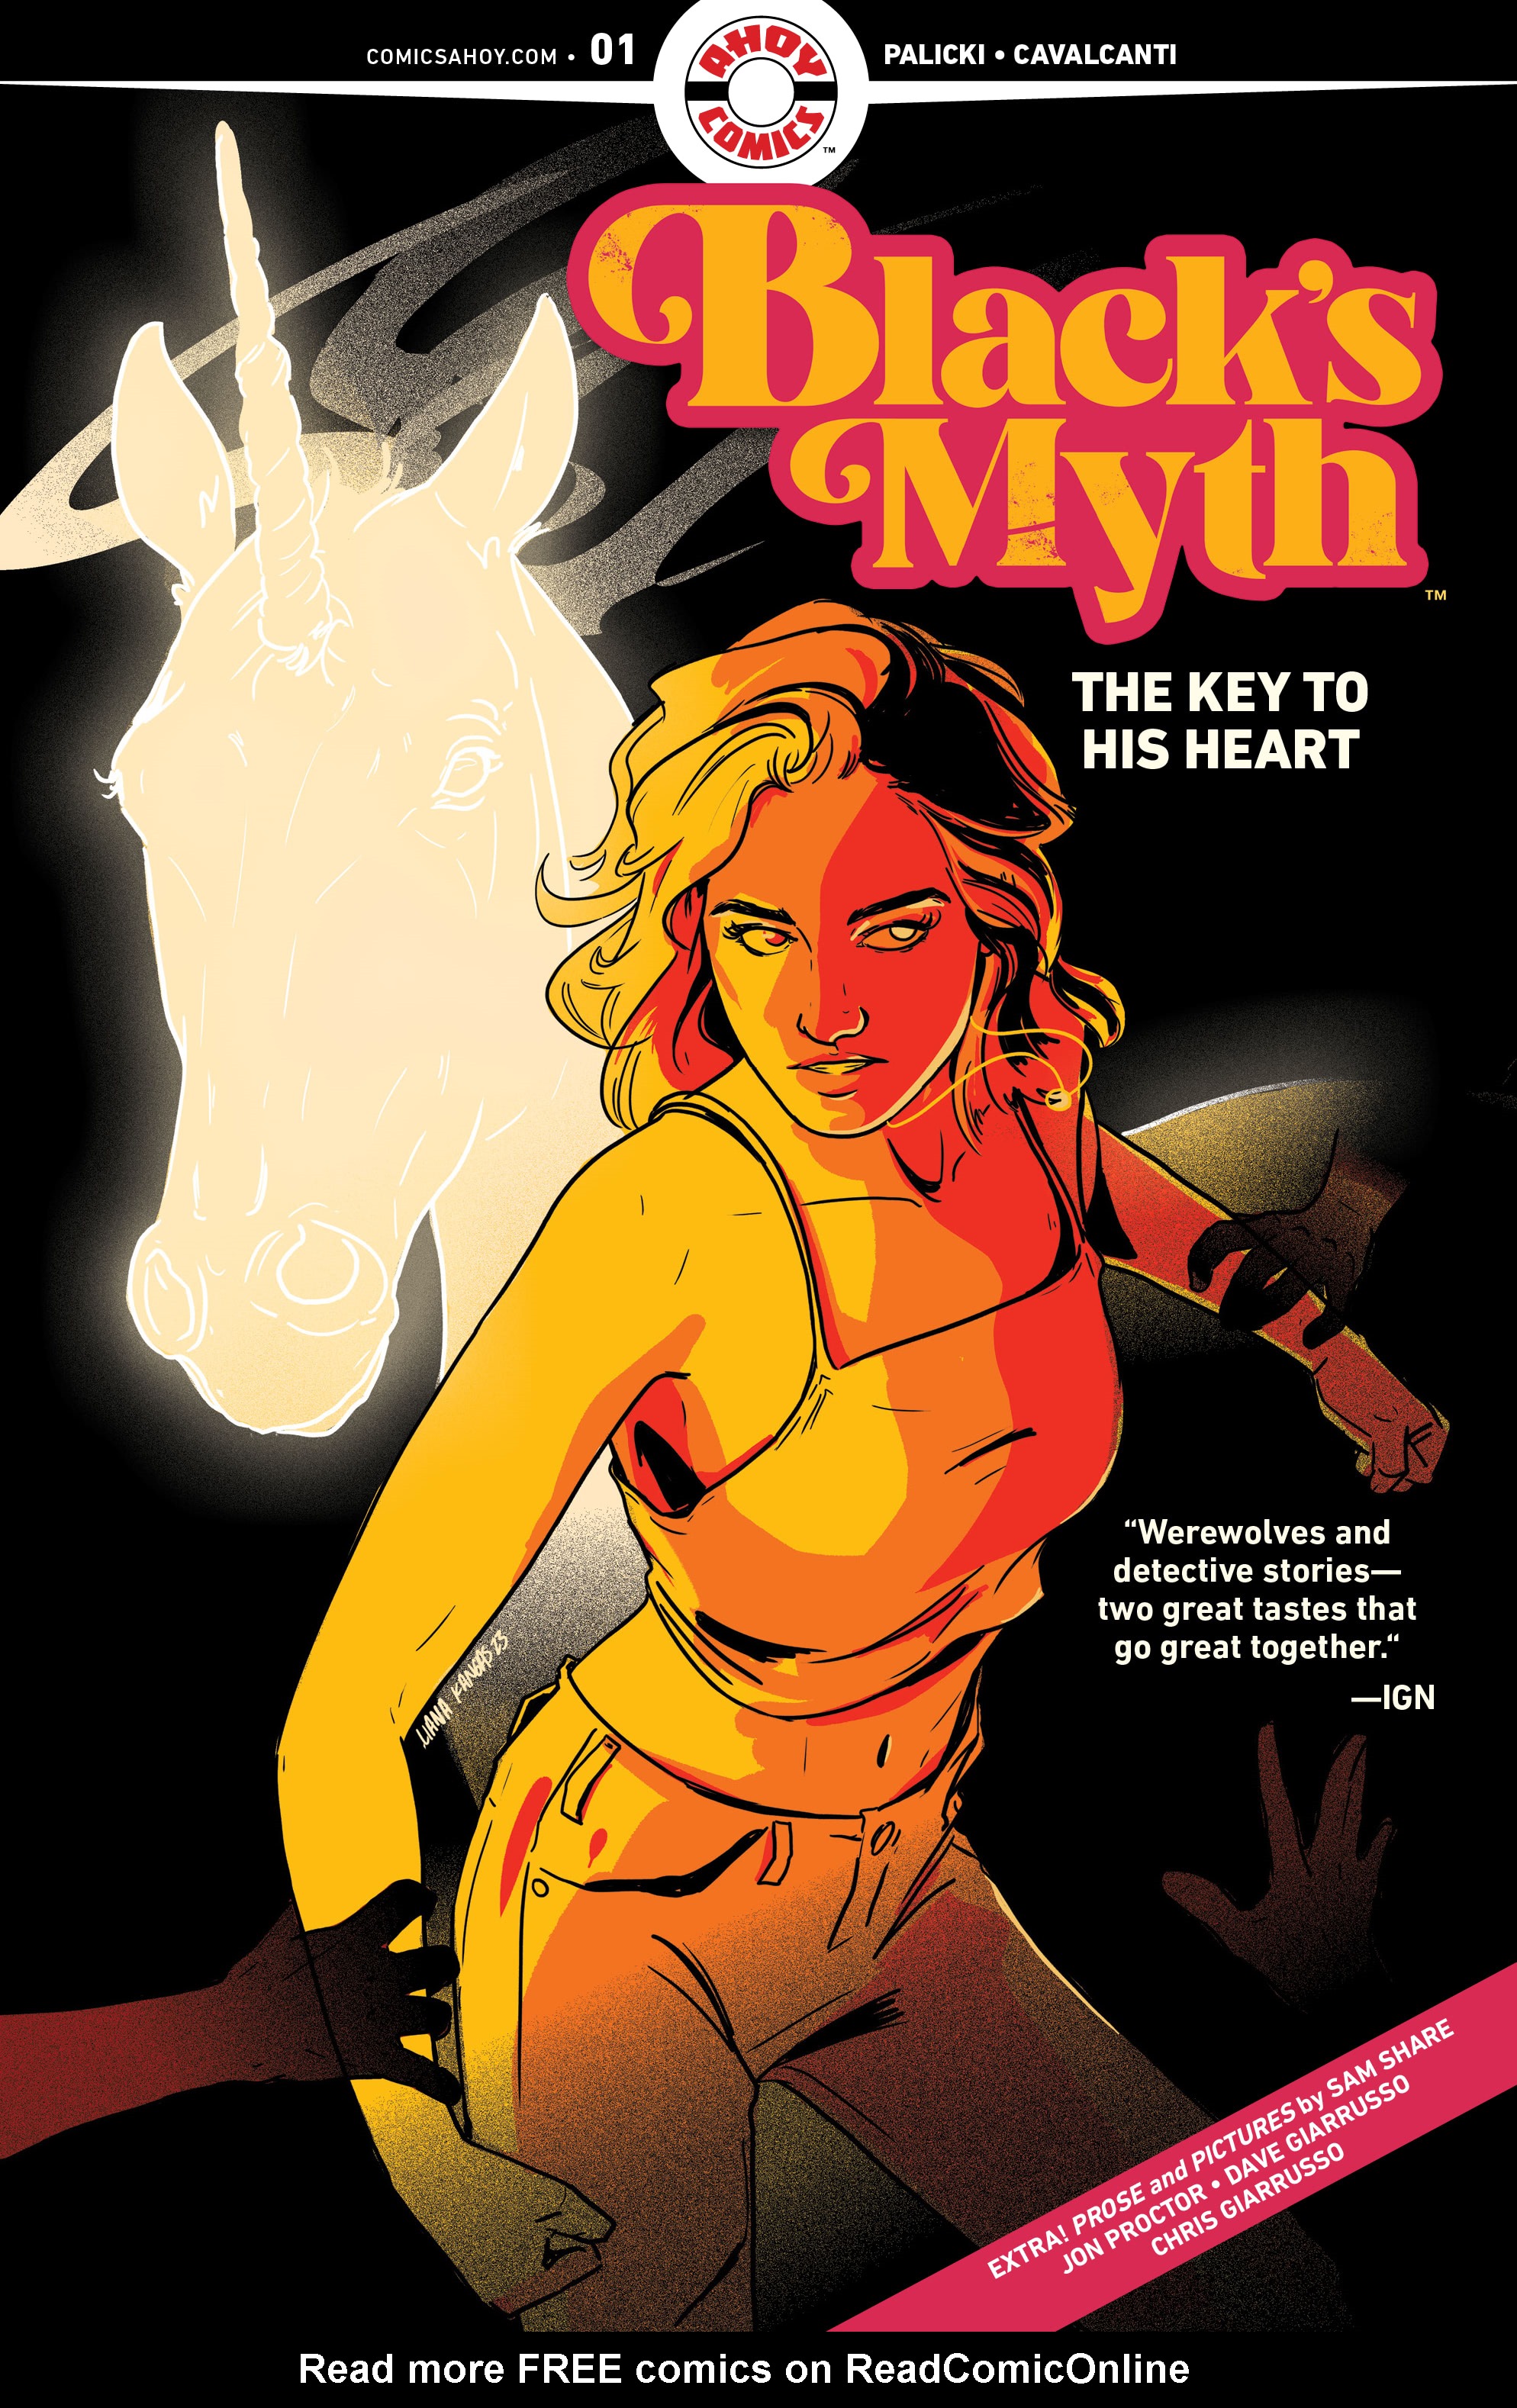 Read online Black’s Myth: The Key to His Heart comic -  Issue #1 - 1